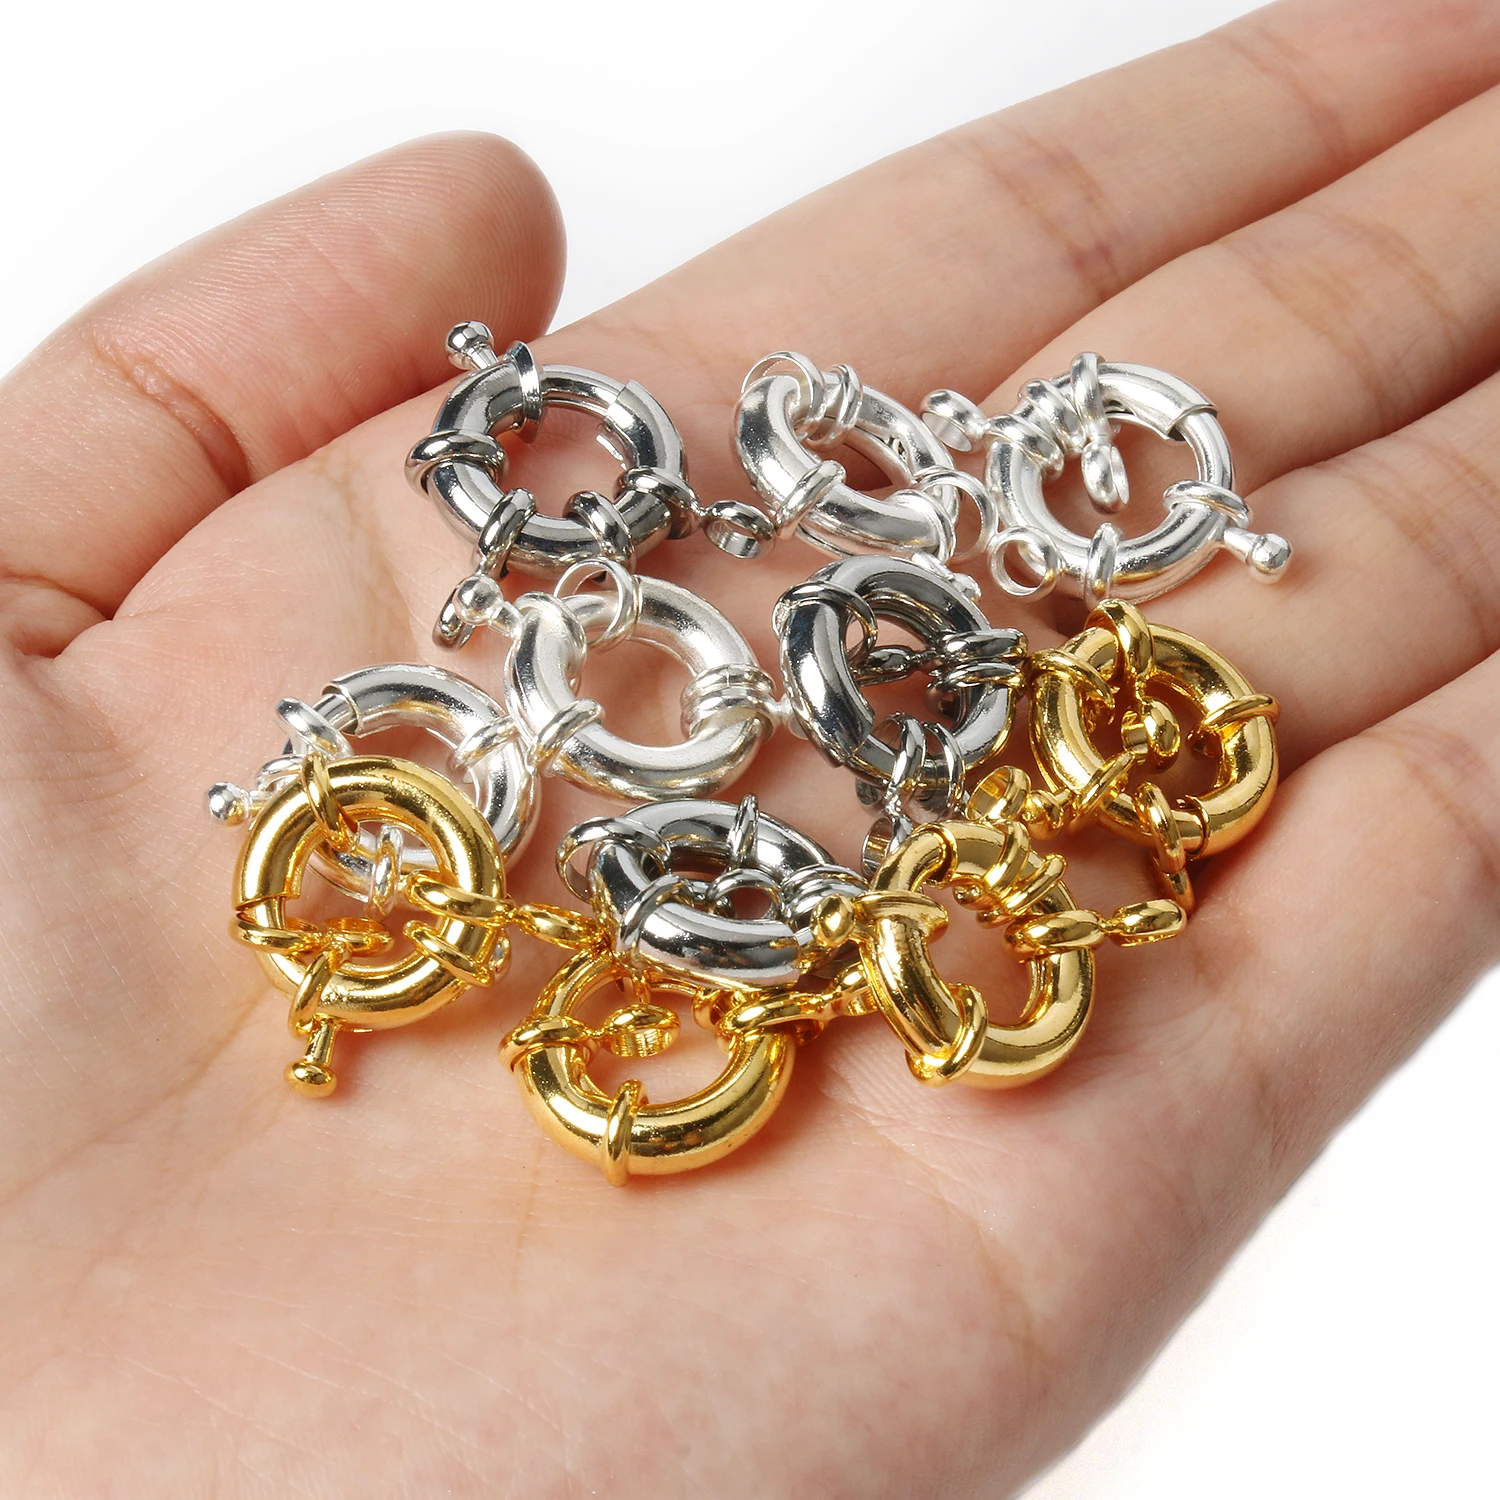 5pcs/lot Copper Sailor Clasps Connector End Clasps Round DIY Jewelry Making  Findings Fit Charm Bracelets Clavicle Necklace Clasp - (Color